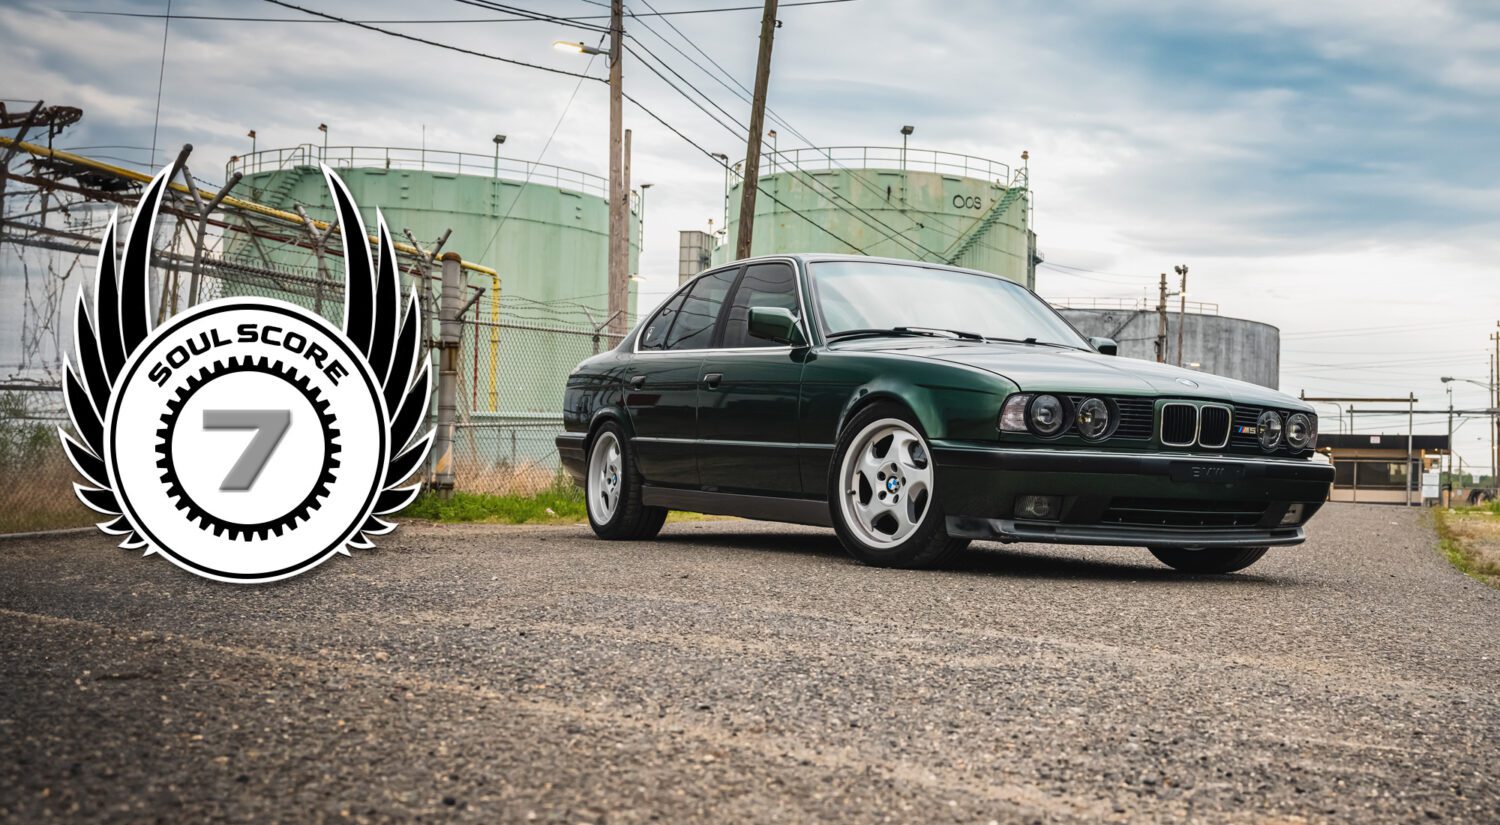 The E34 M5 shows what’s missing from modern BMWs